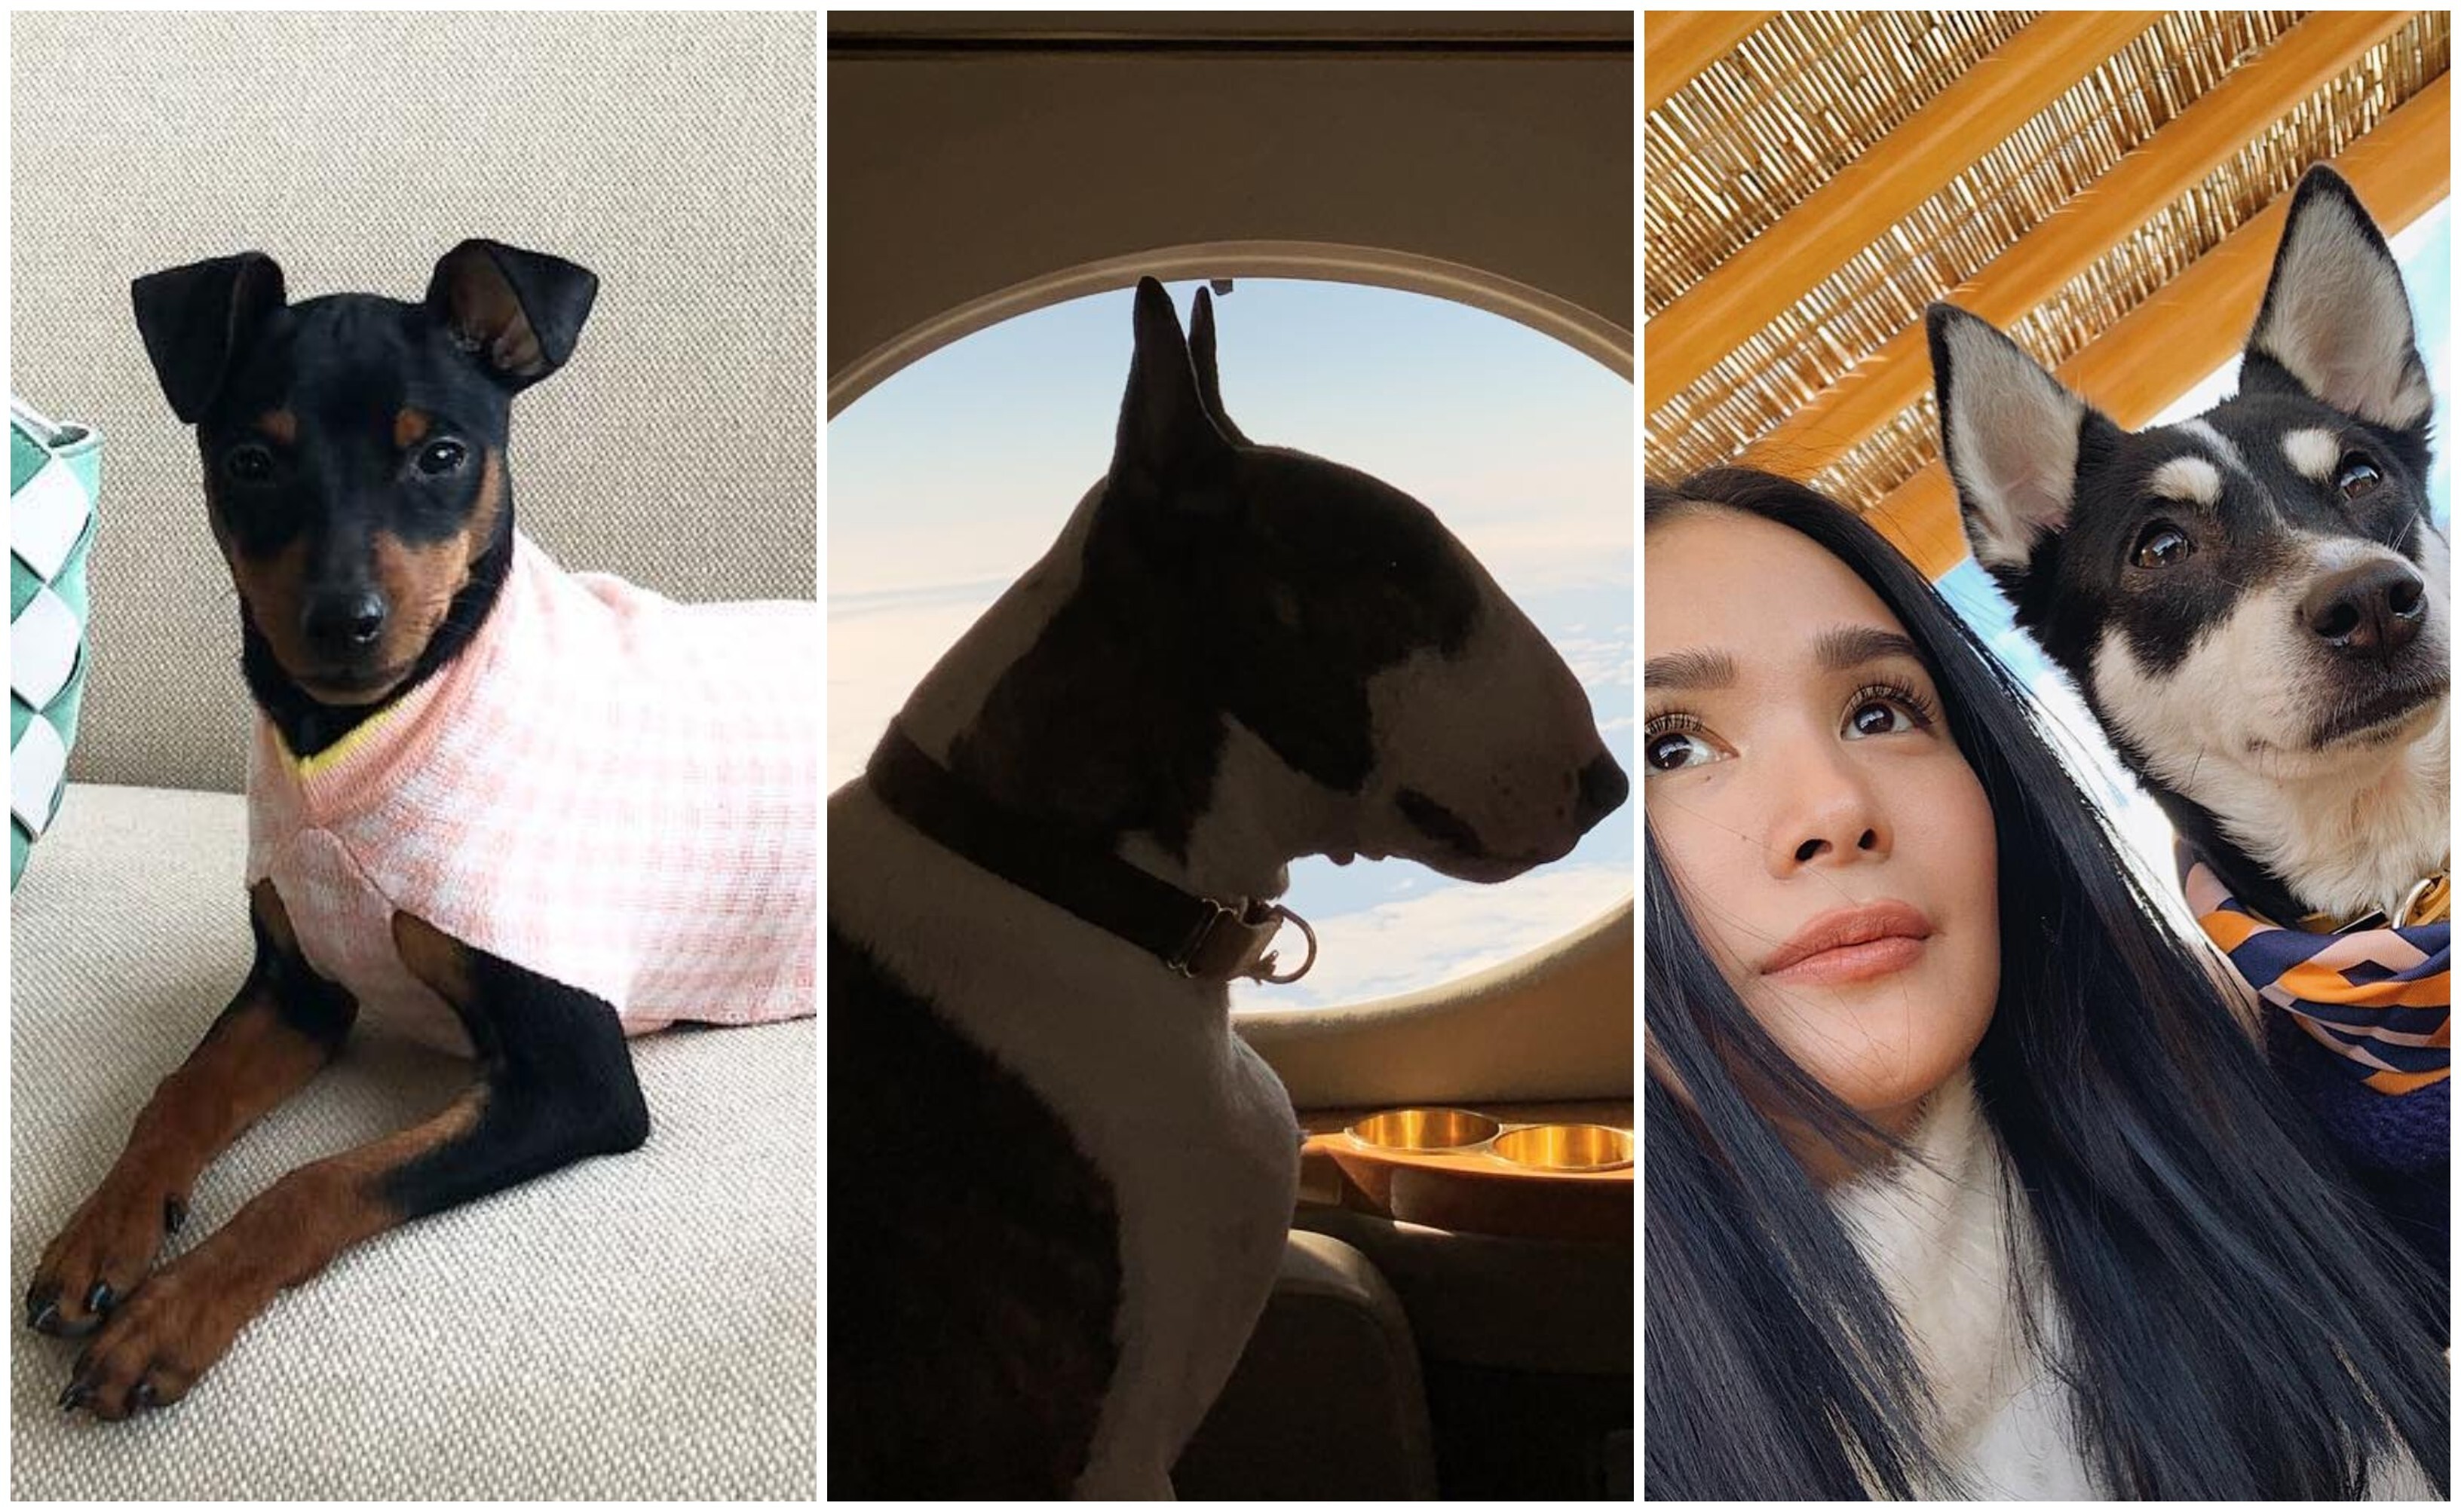 Pampered pooches: From left to right, Bryan Boy’s Bettina, Marc Jacobs’ Neville and Heart Evangelista’s Panda. Photos: @bettinabuffe; @nevillejacobs; @iamhearte/Instagram